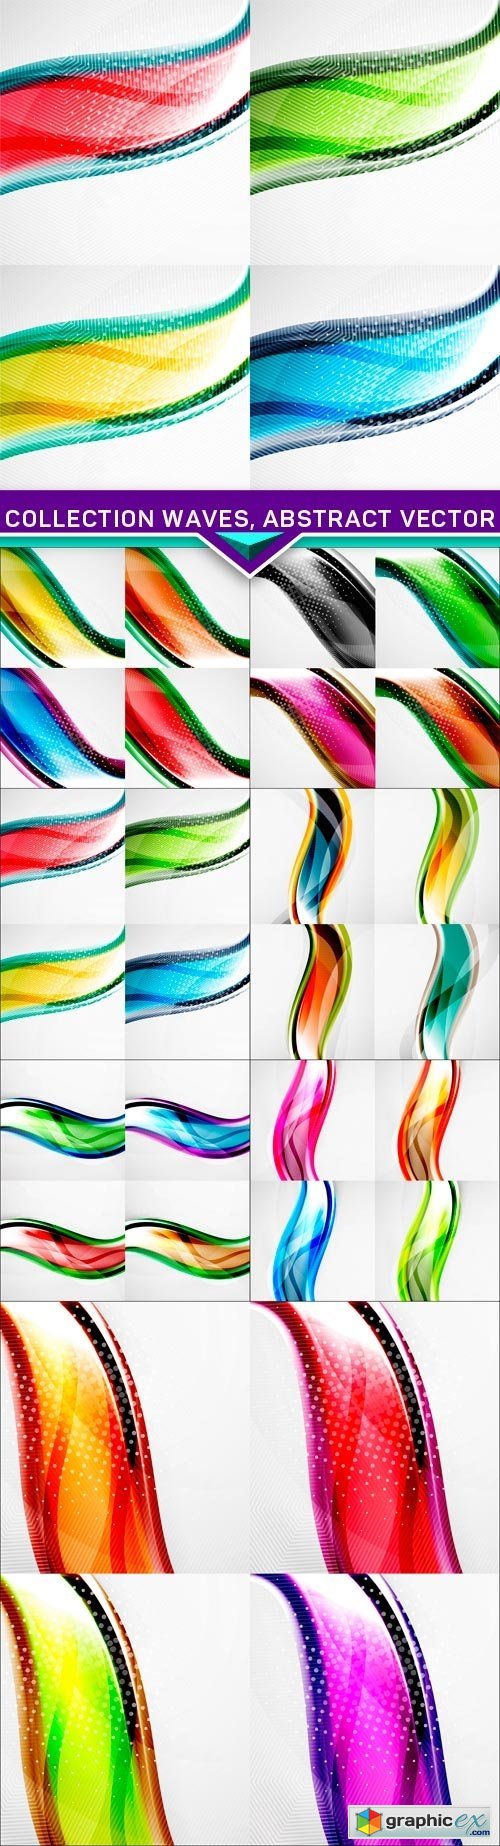 ollection waves, abstract vector 7x EPS